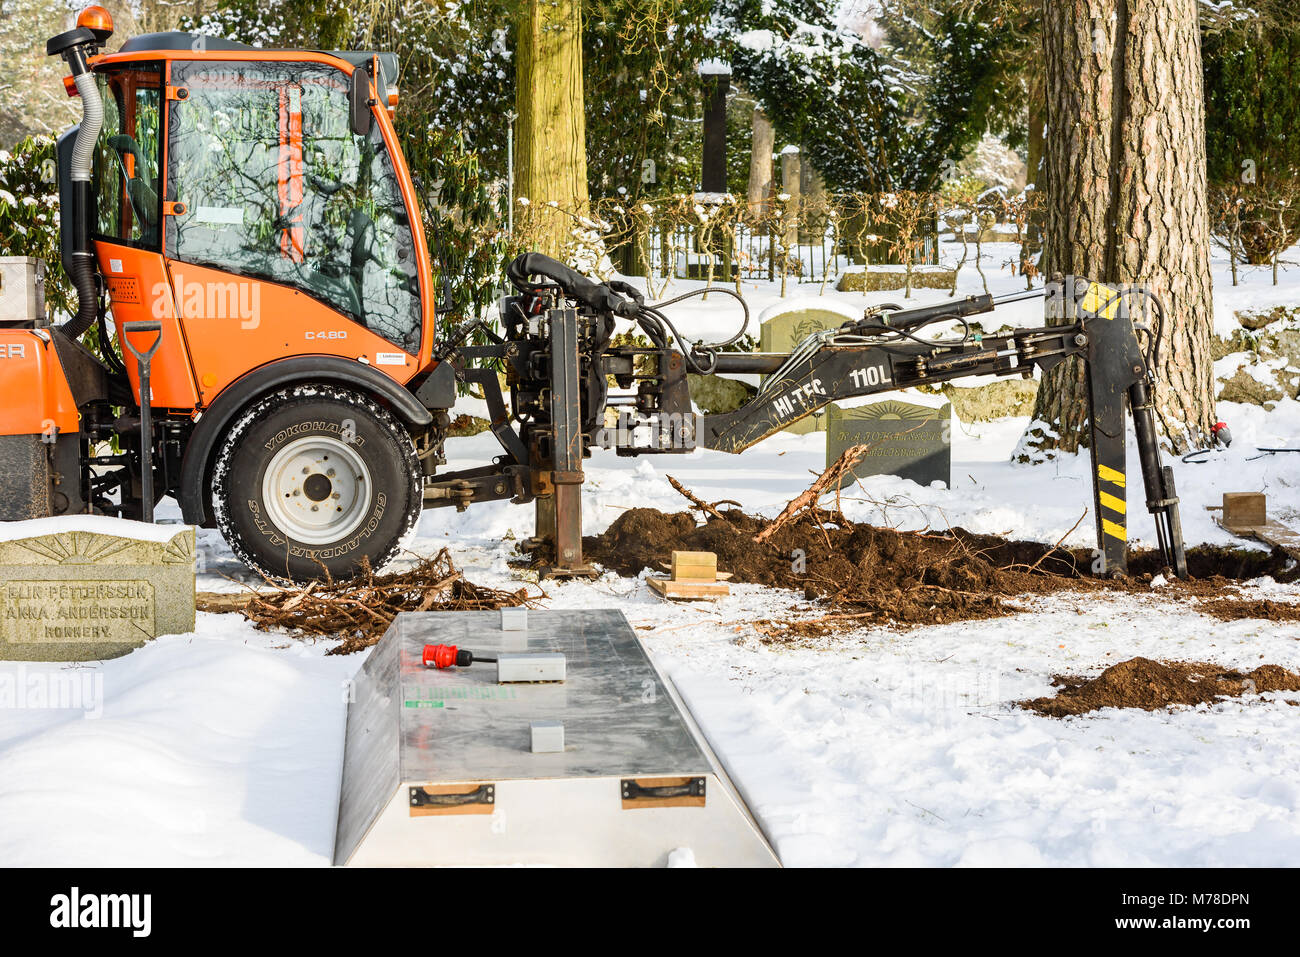 Ronneby, Sweden - March 1, 2018: Documentary of everyday life and environment. Holder C480 tractor used as a grave digger at a cemetery in winter. Roo Stock Photo